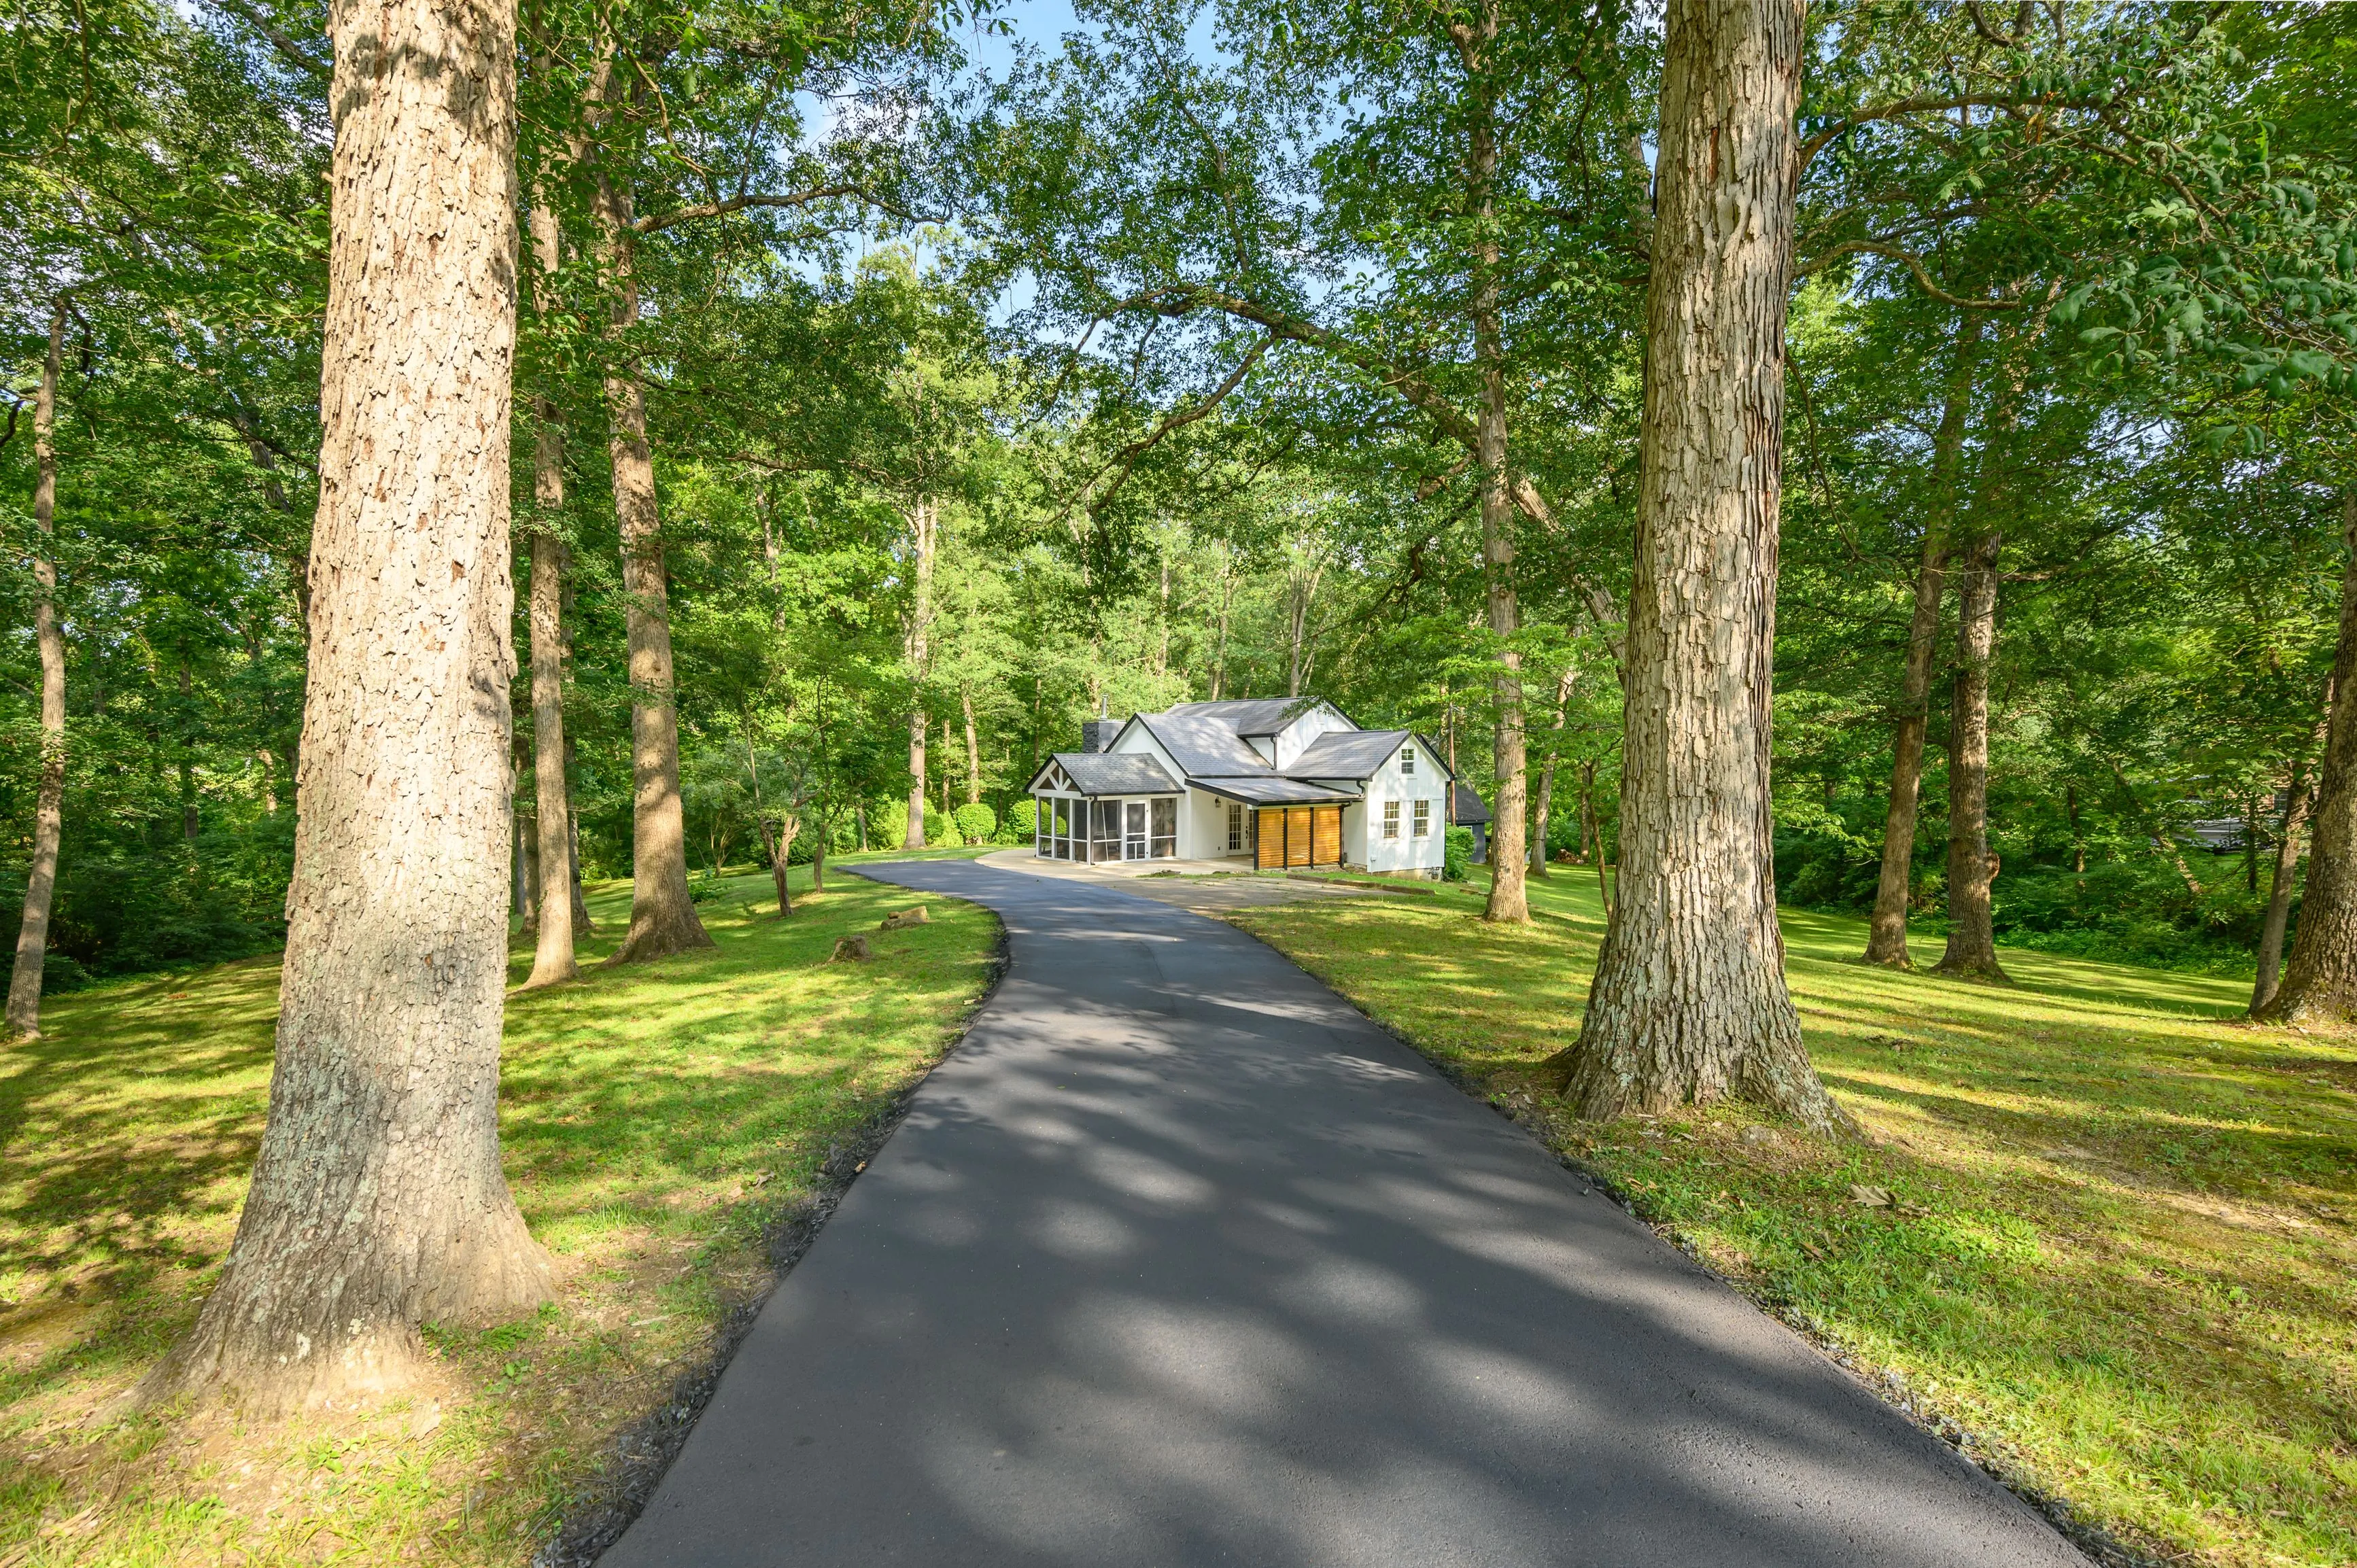 Paved driveway leading to a house surrounded by lush green trees on a sunny day.